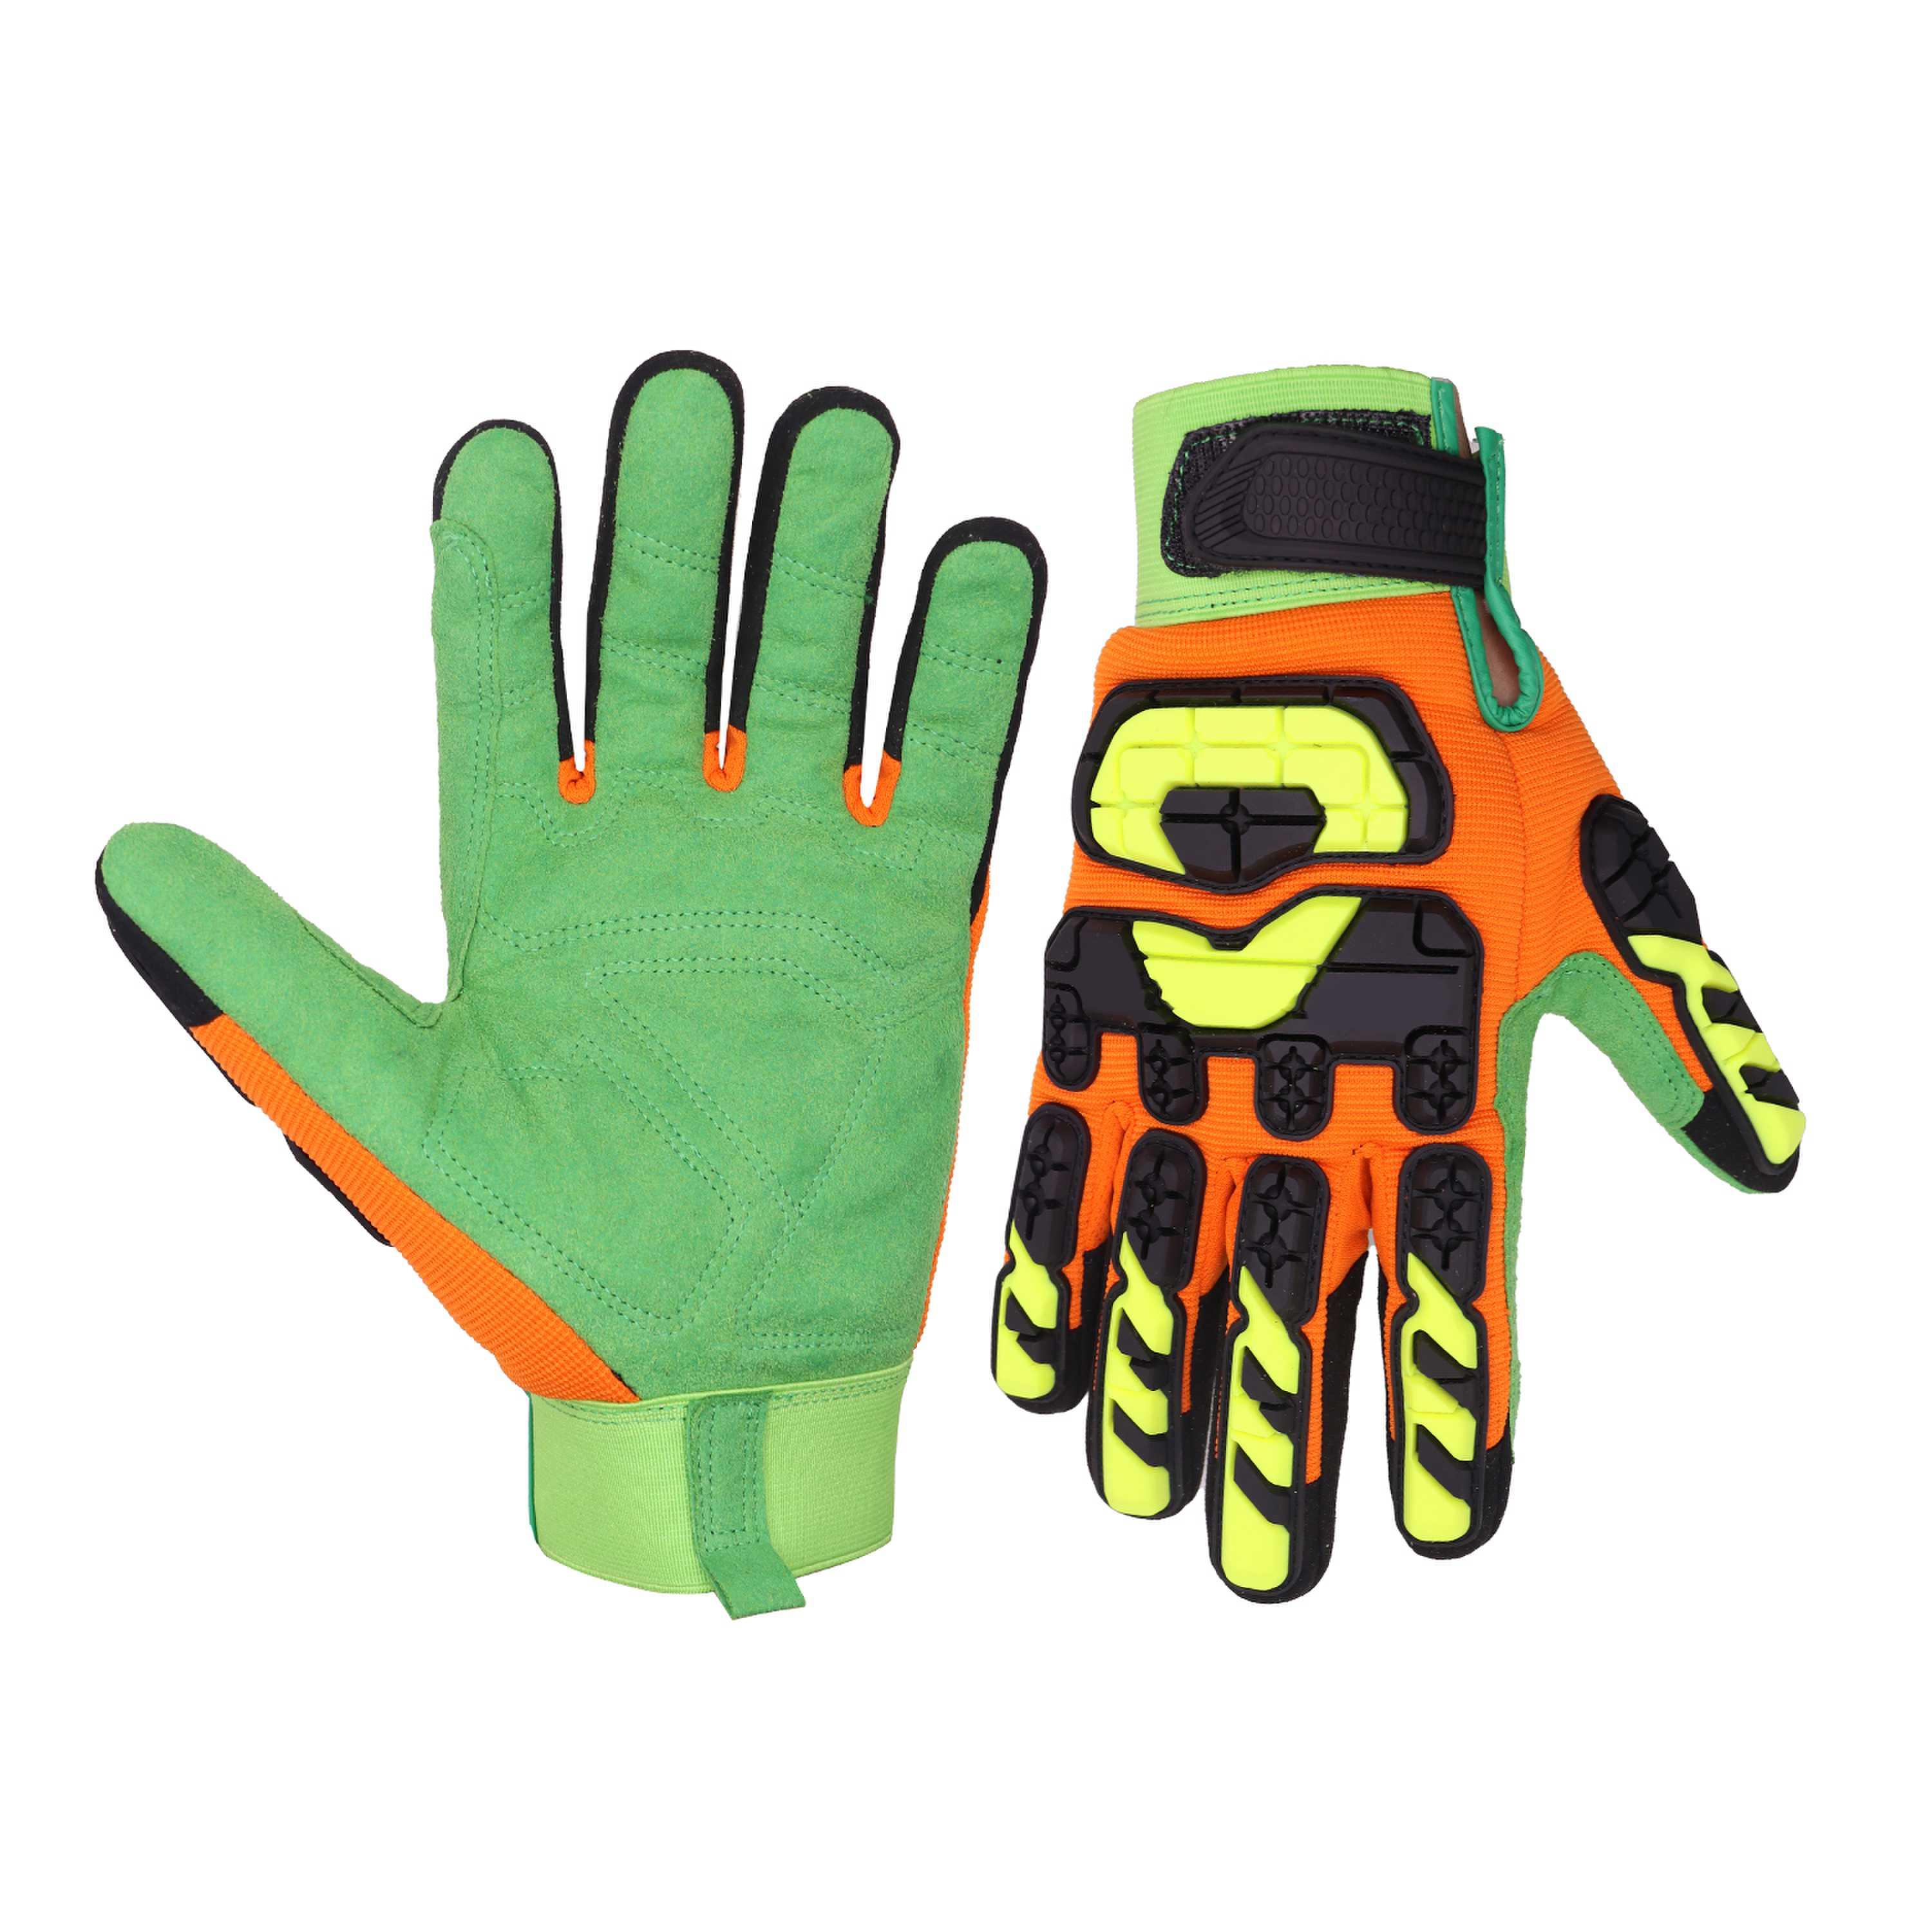 H687 PRISAFETY High Impact Resistant Mining oil and gas safety rigger working glove cut 5 hand safety gloves work